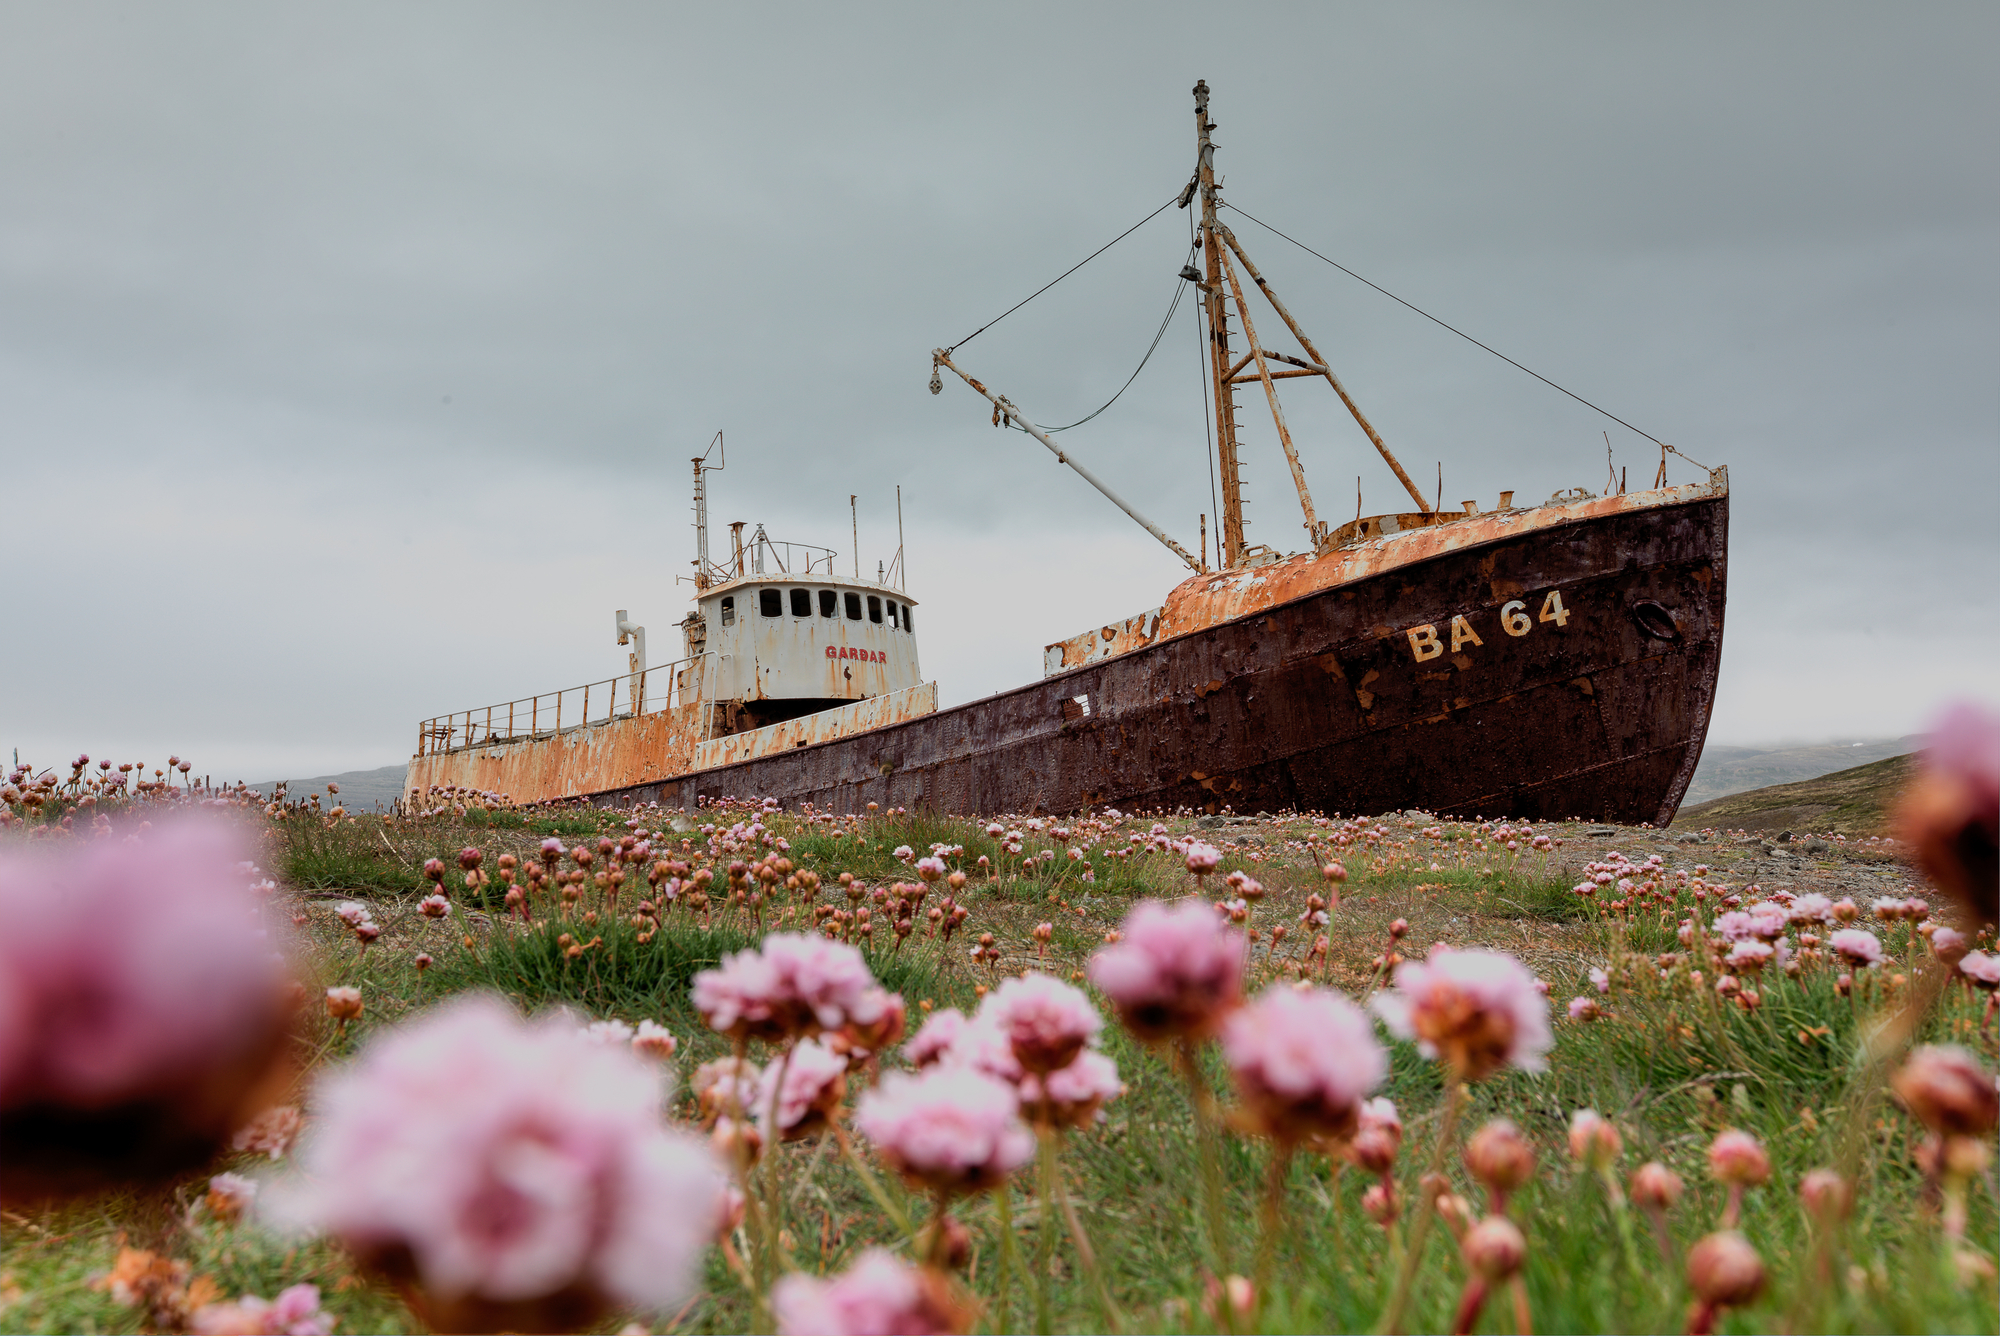 Abandoned fishing boat, huge ship, megalophobia picture stock photography